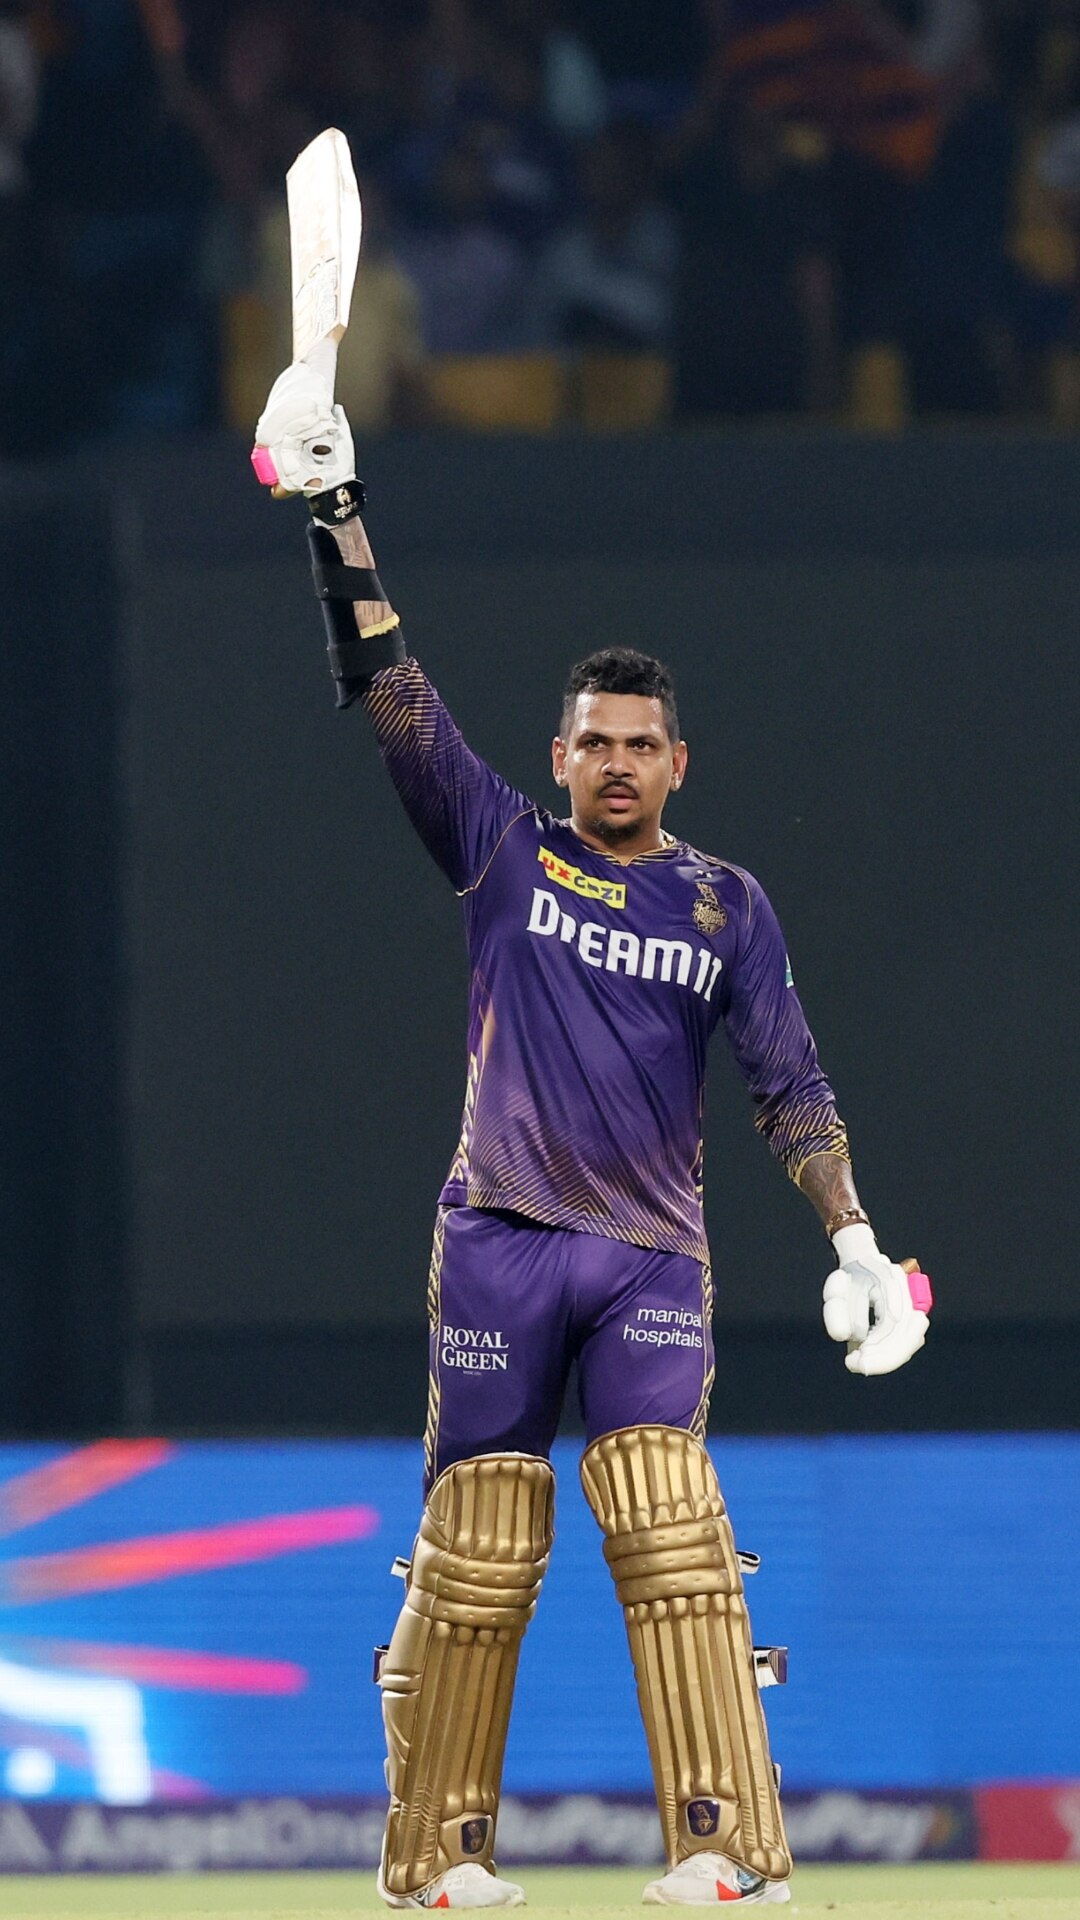  Ultimate fantasy player And Most Valuable Player: Sunil Narine (Rs 10 lakh, Rs 10 lakh)